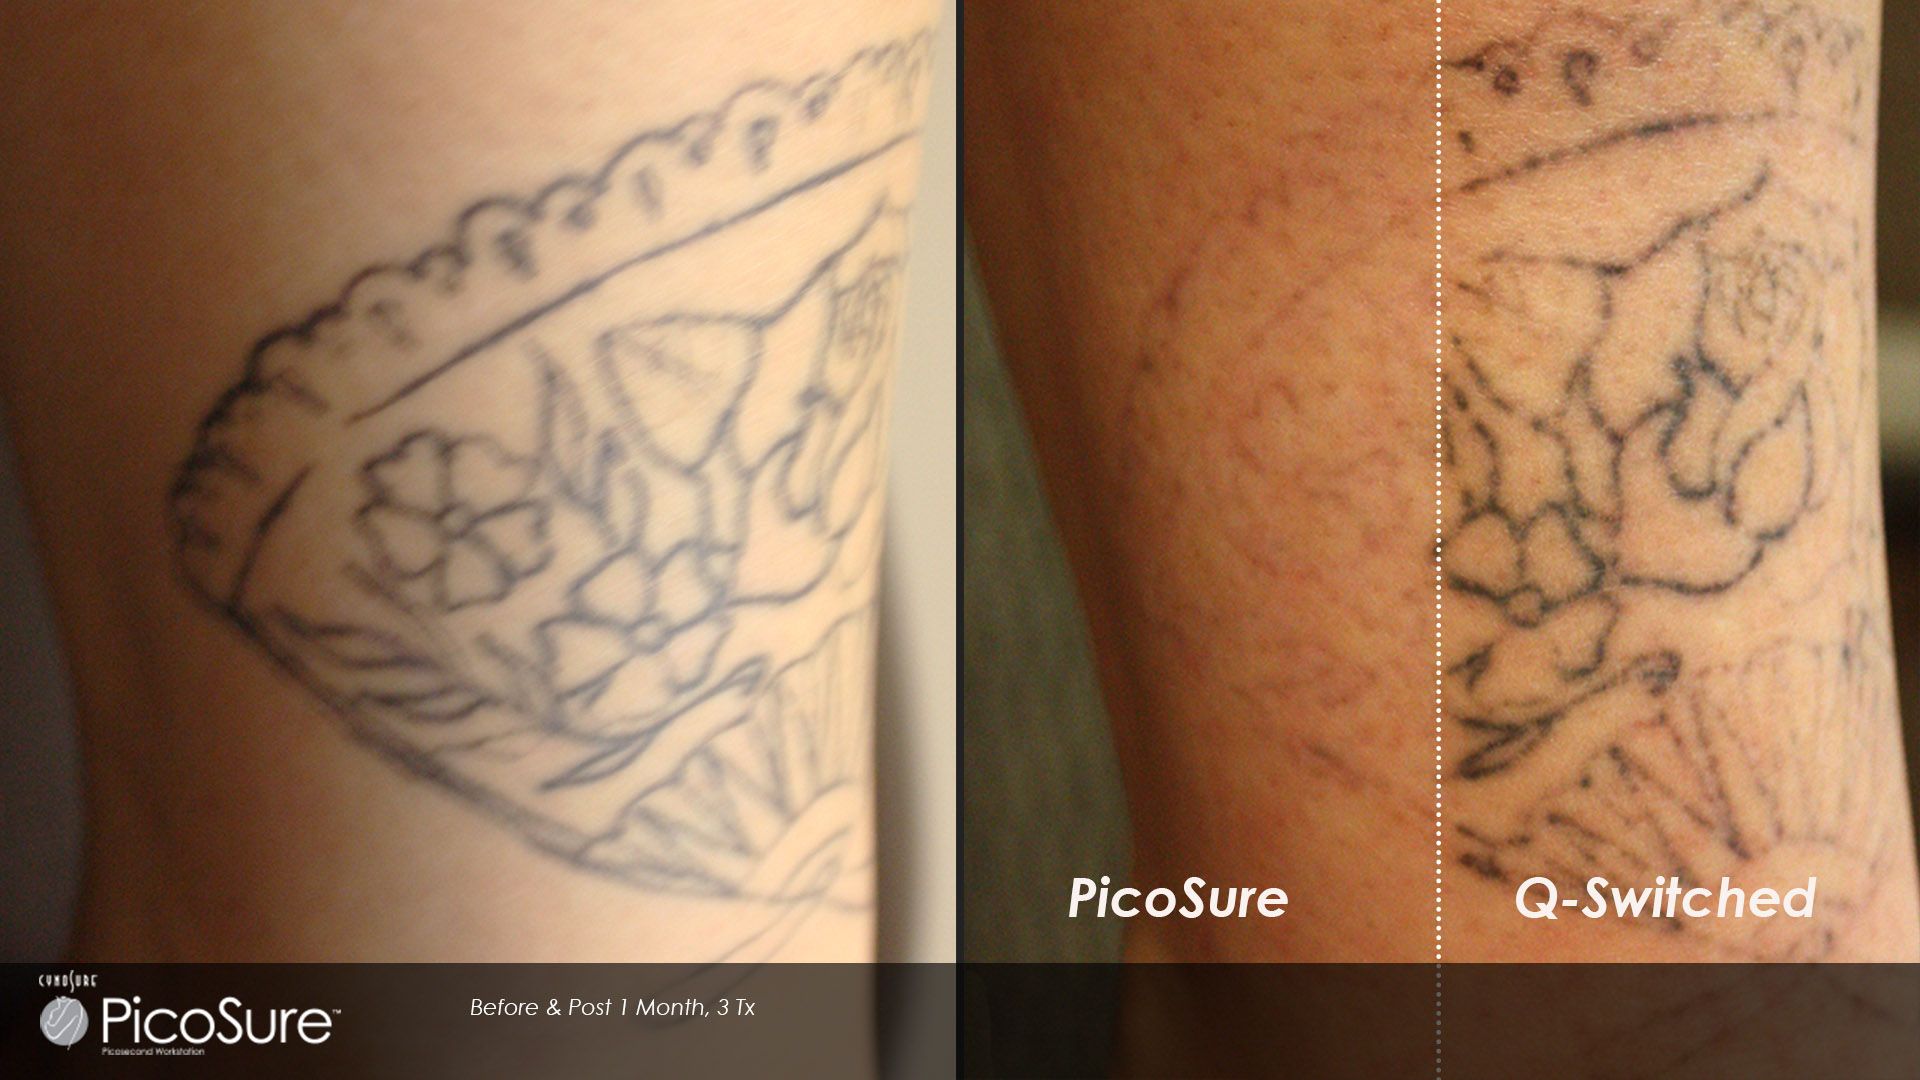 Before and after laser tattoo removal results